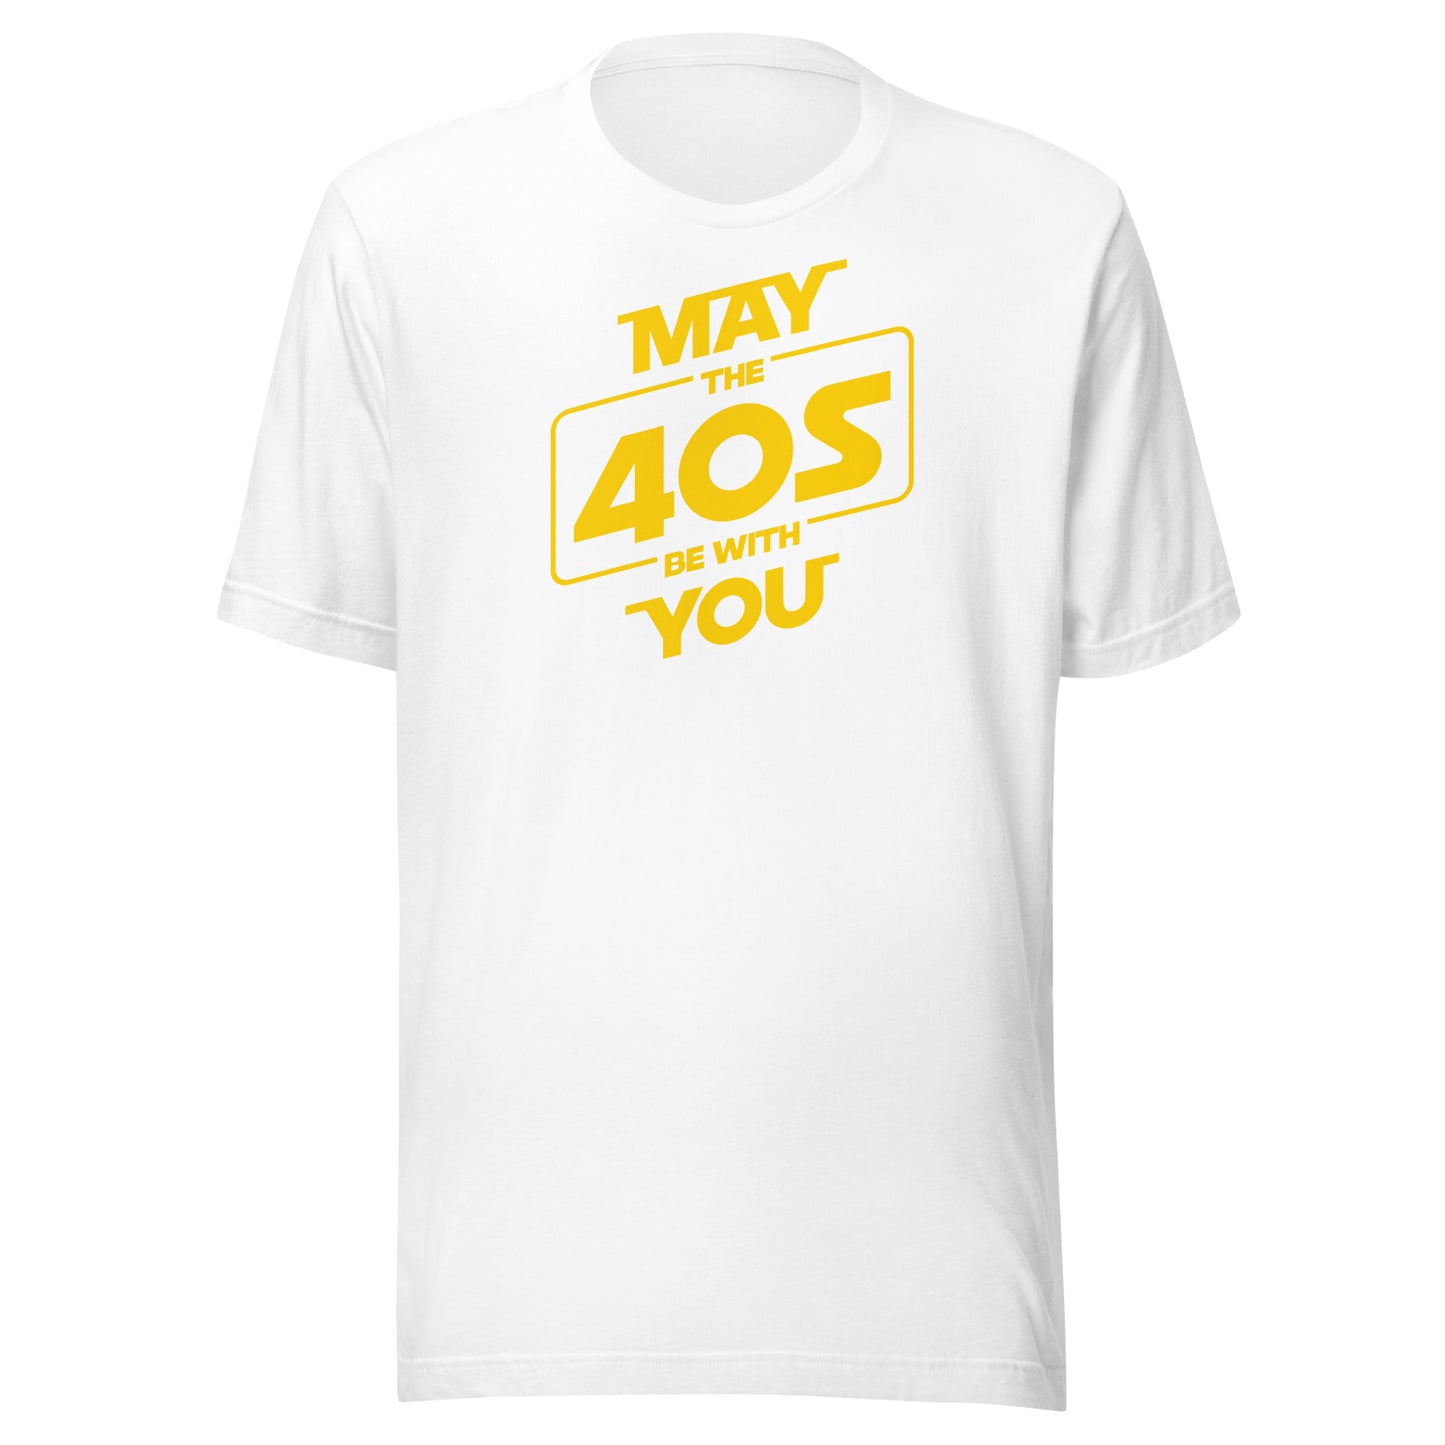 May the 40s Be With You (Alt)